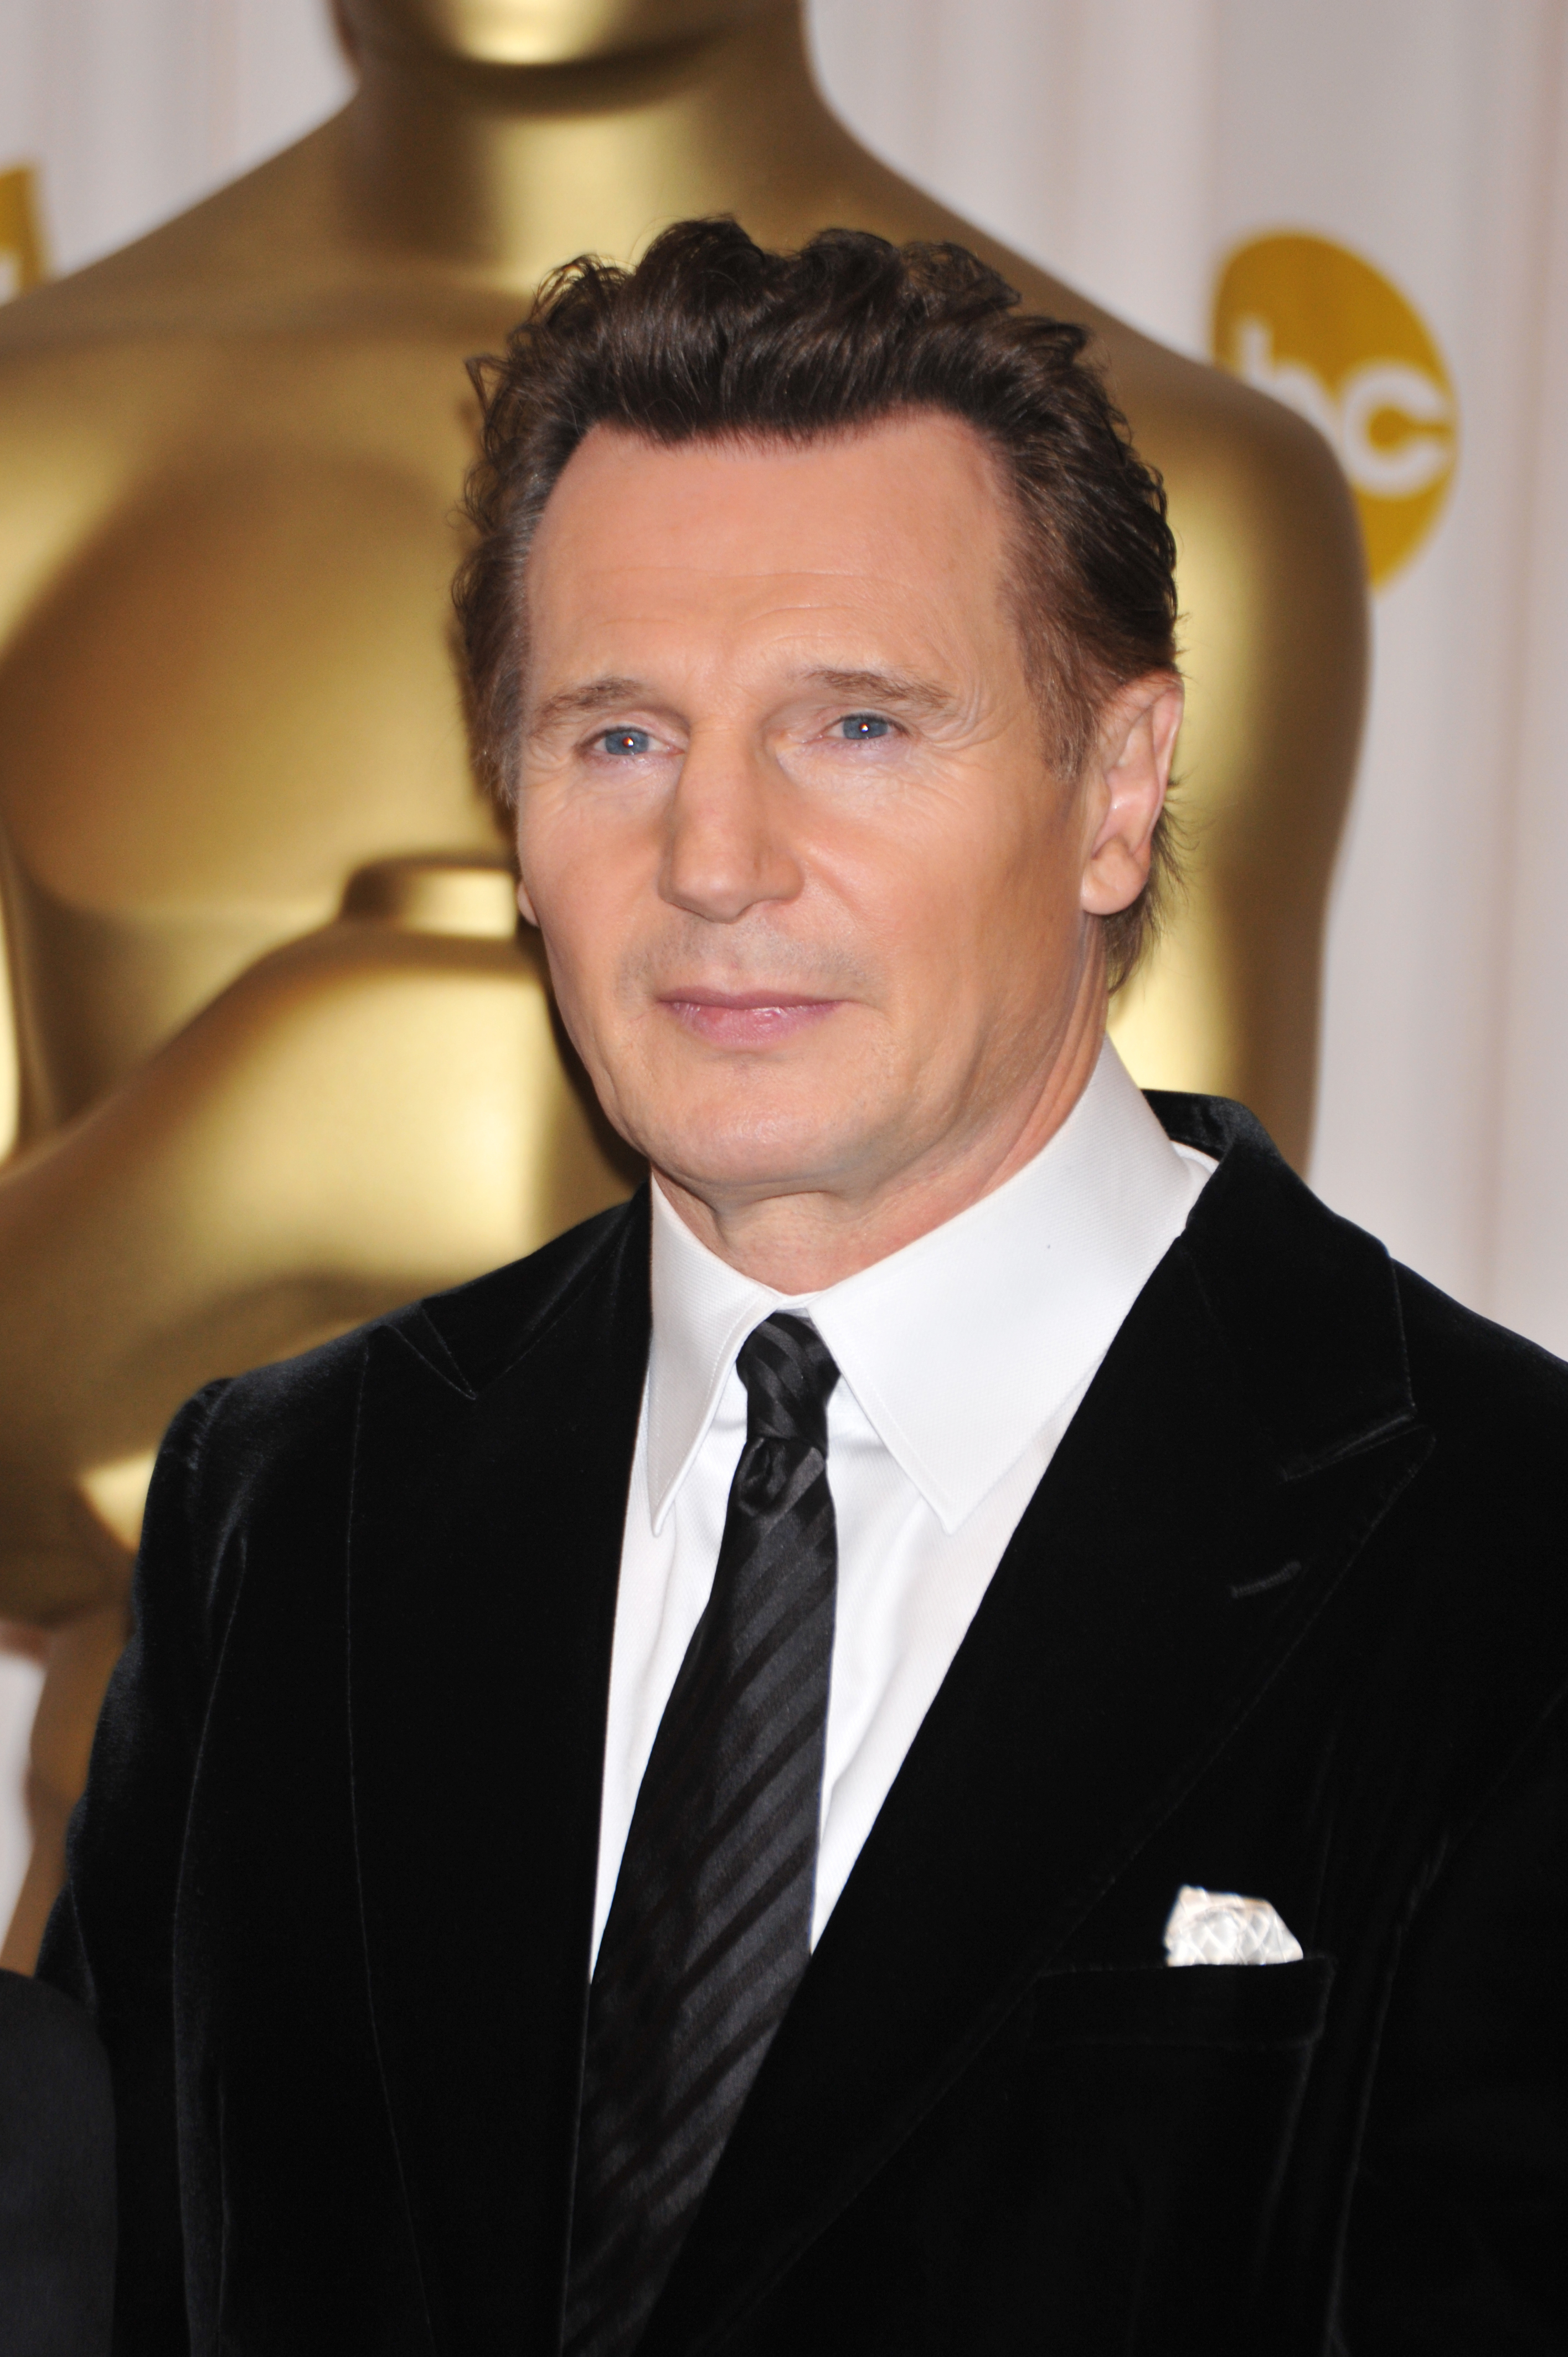 Liam Neeson at the 81st annual Academy Awards on February 22, 2009 in Hollywood, California. | Source: Getty Images